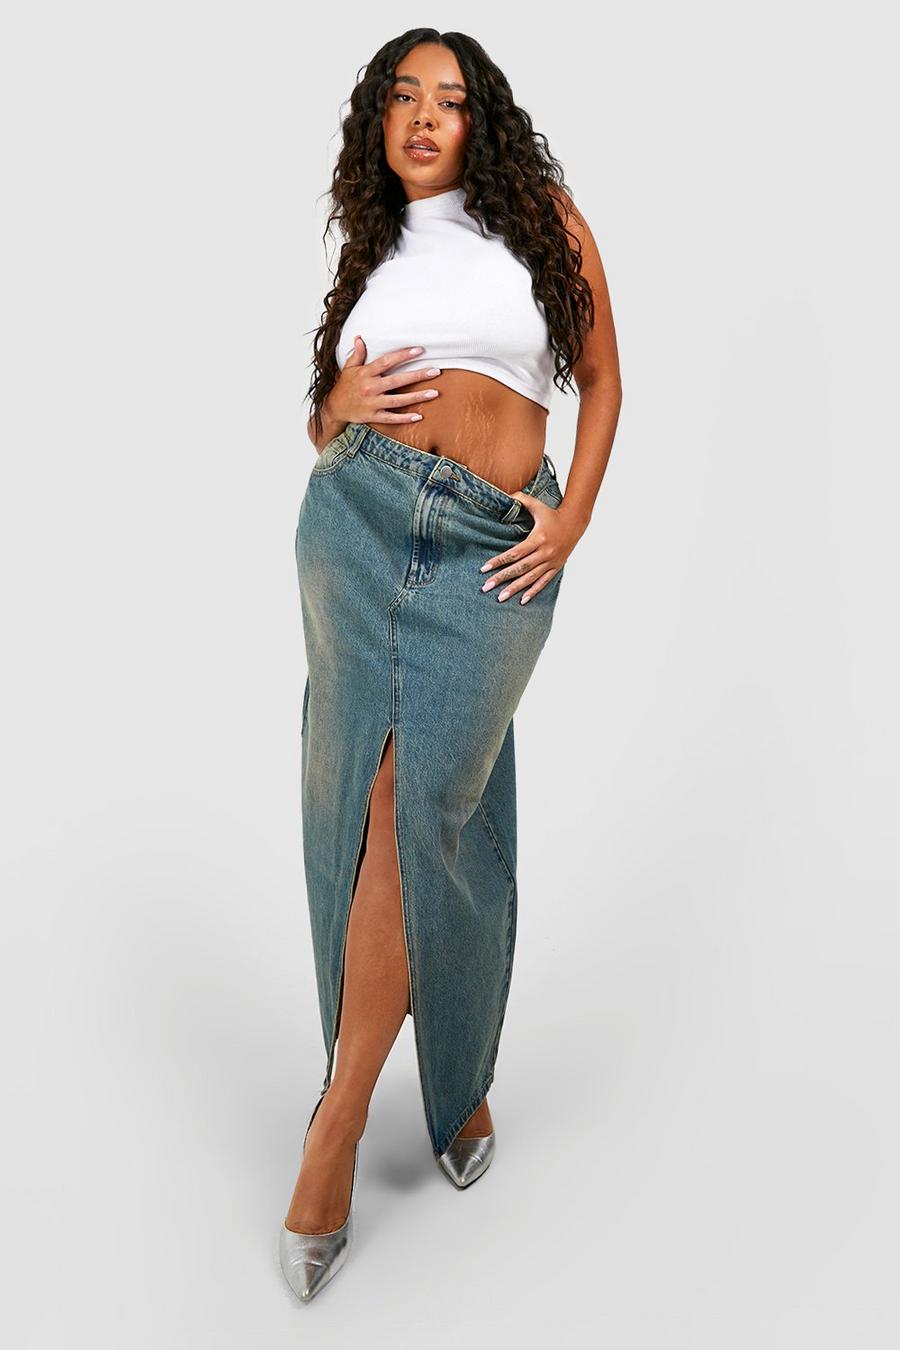 Plus Size Clearance Skirts, Jeans & Pants Outlet